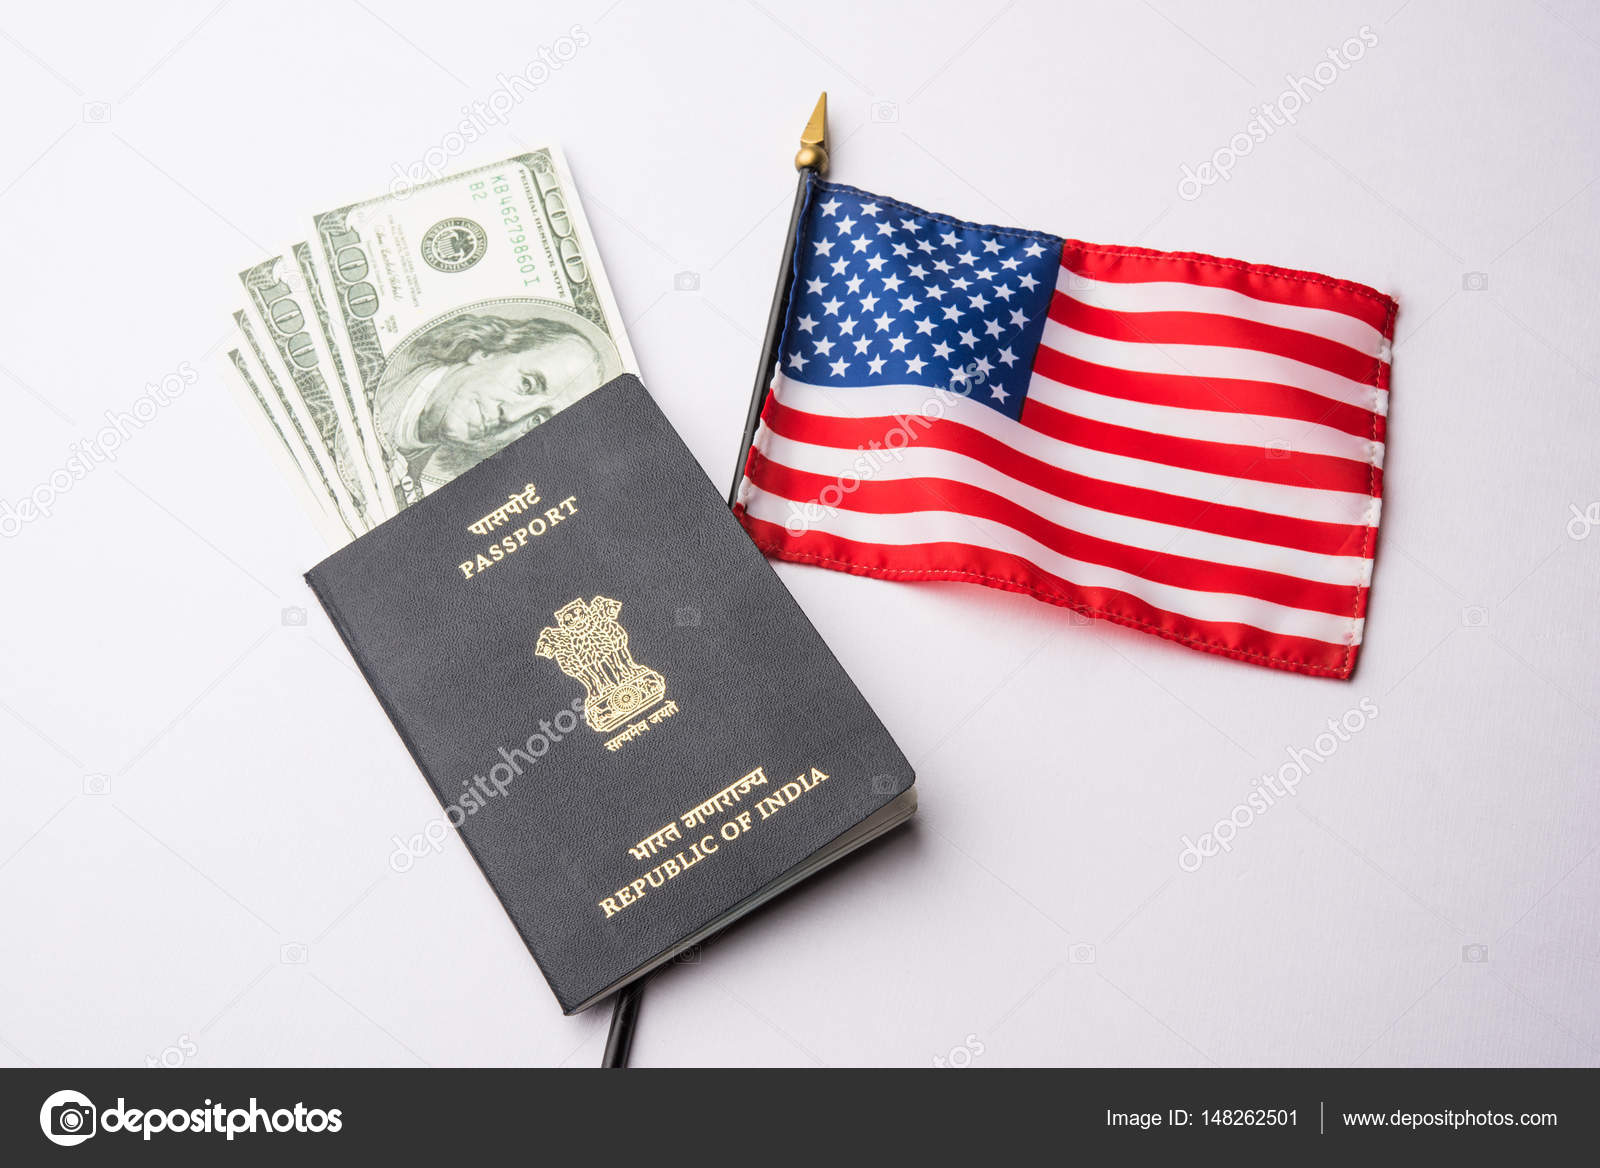 Concept Showing Indian Passport With US Currency Notes Or, 58% OFF